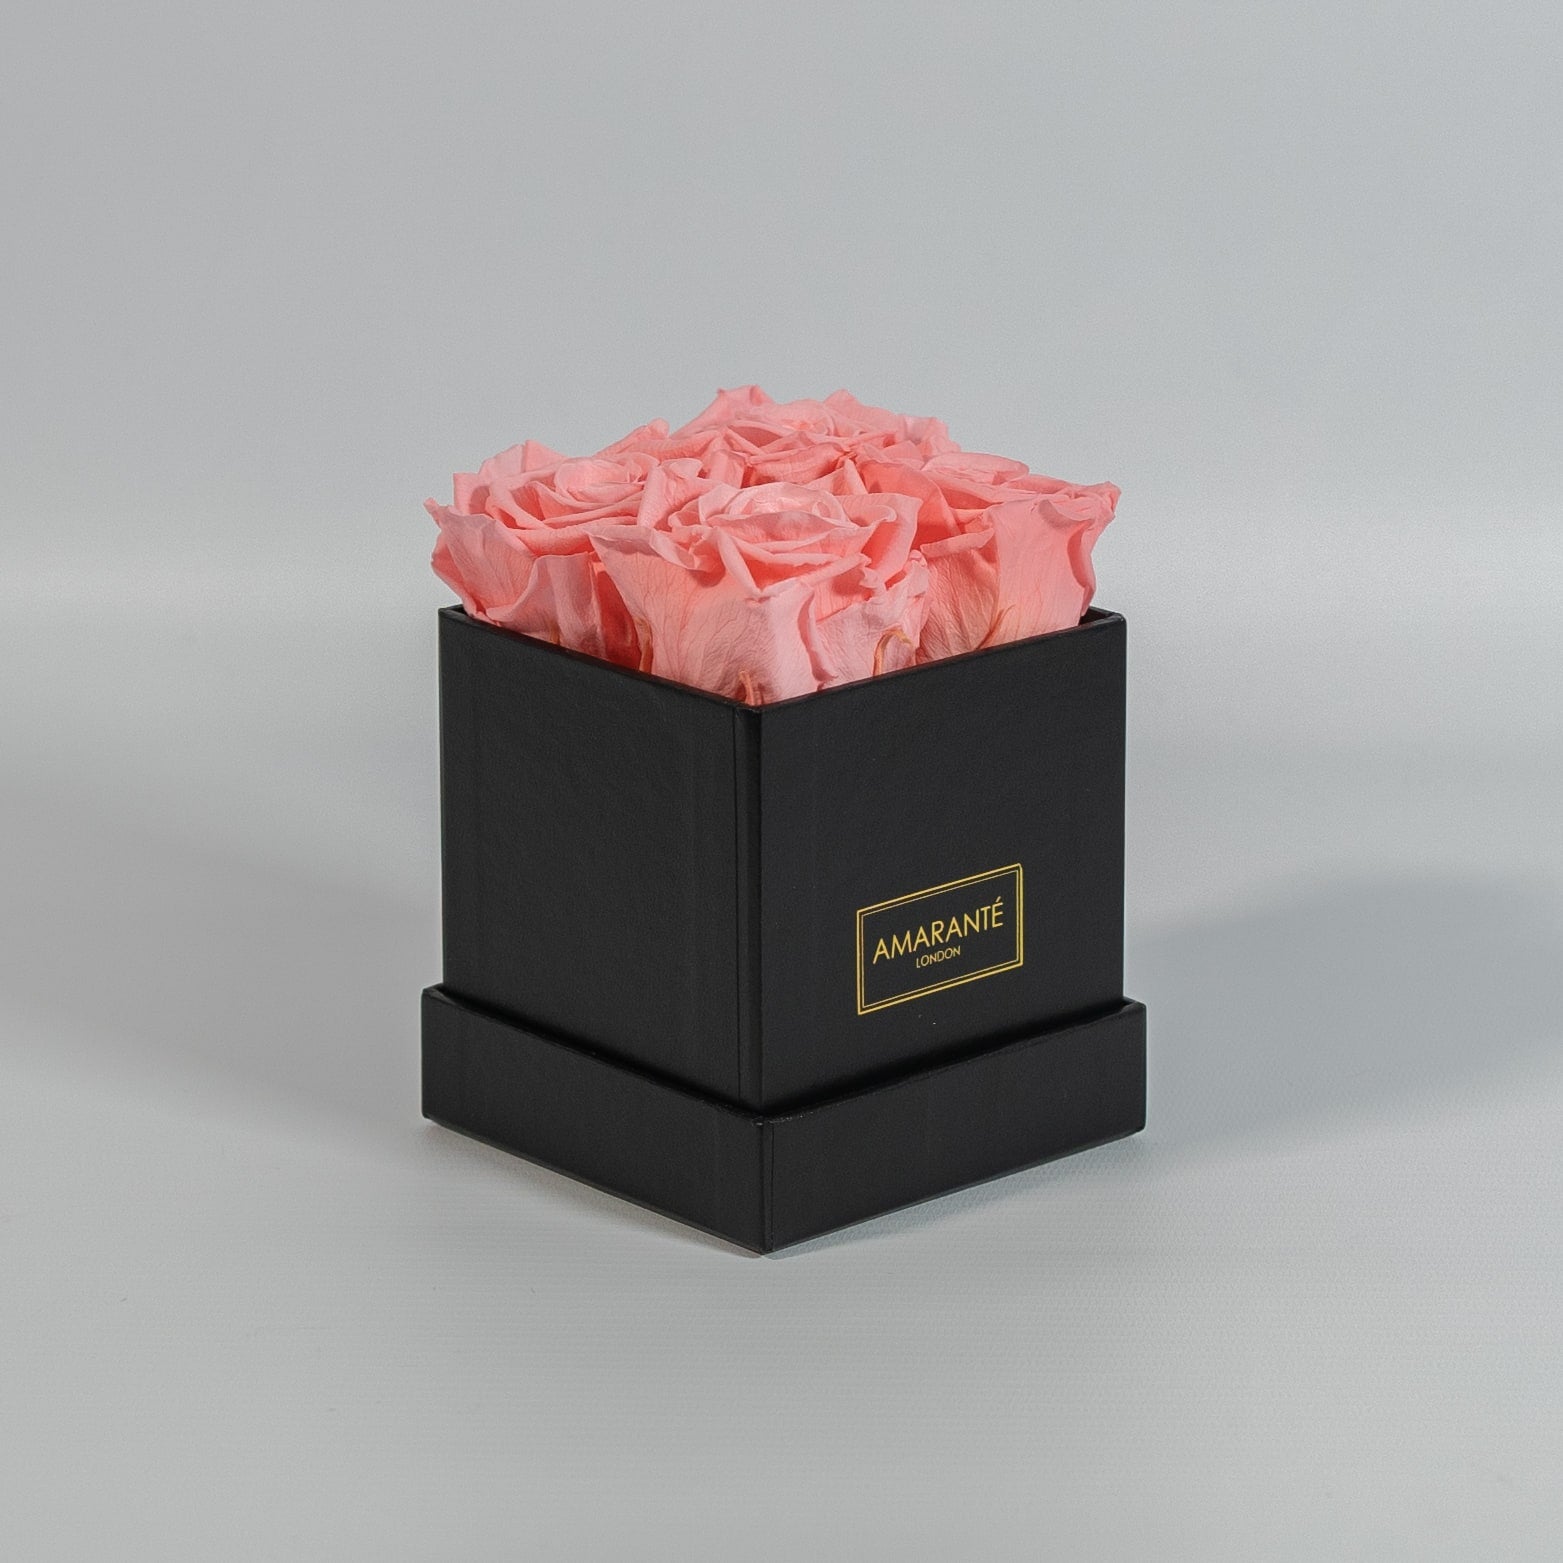 Delicate light pink roses entrenched in a bold black box 